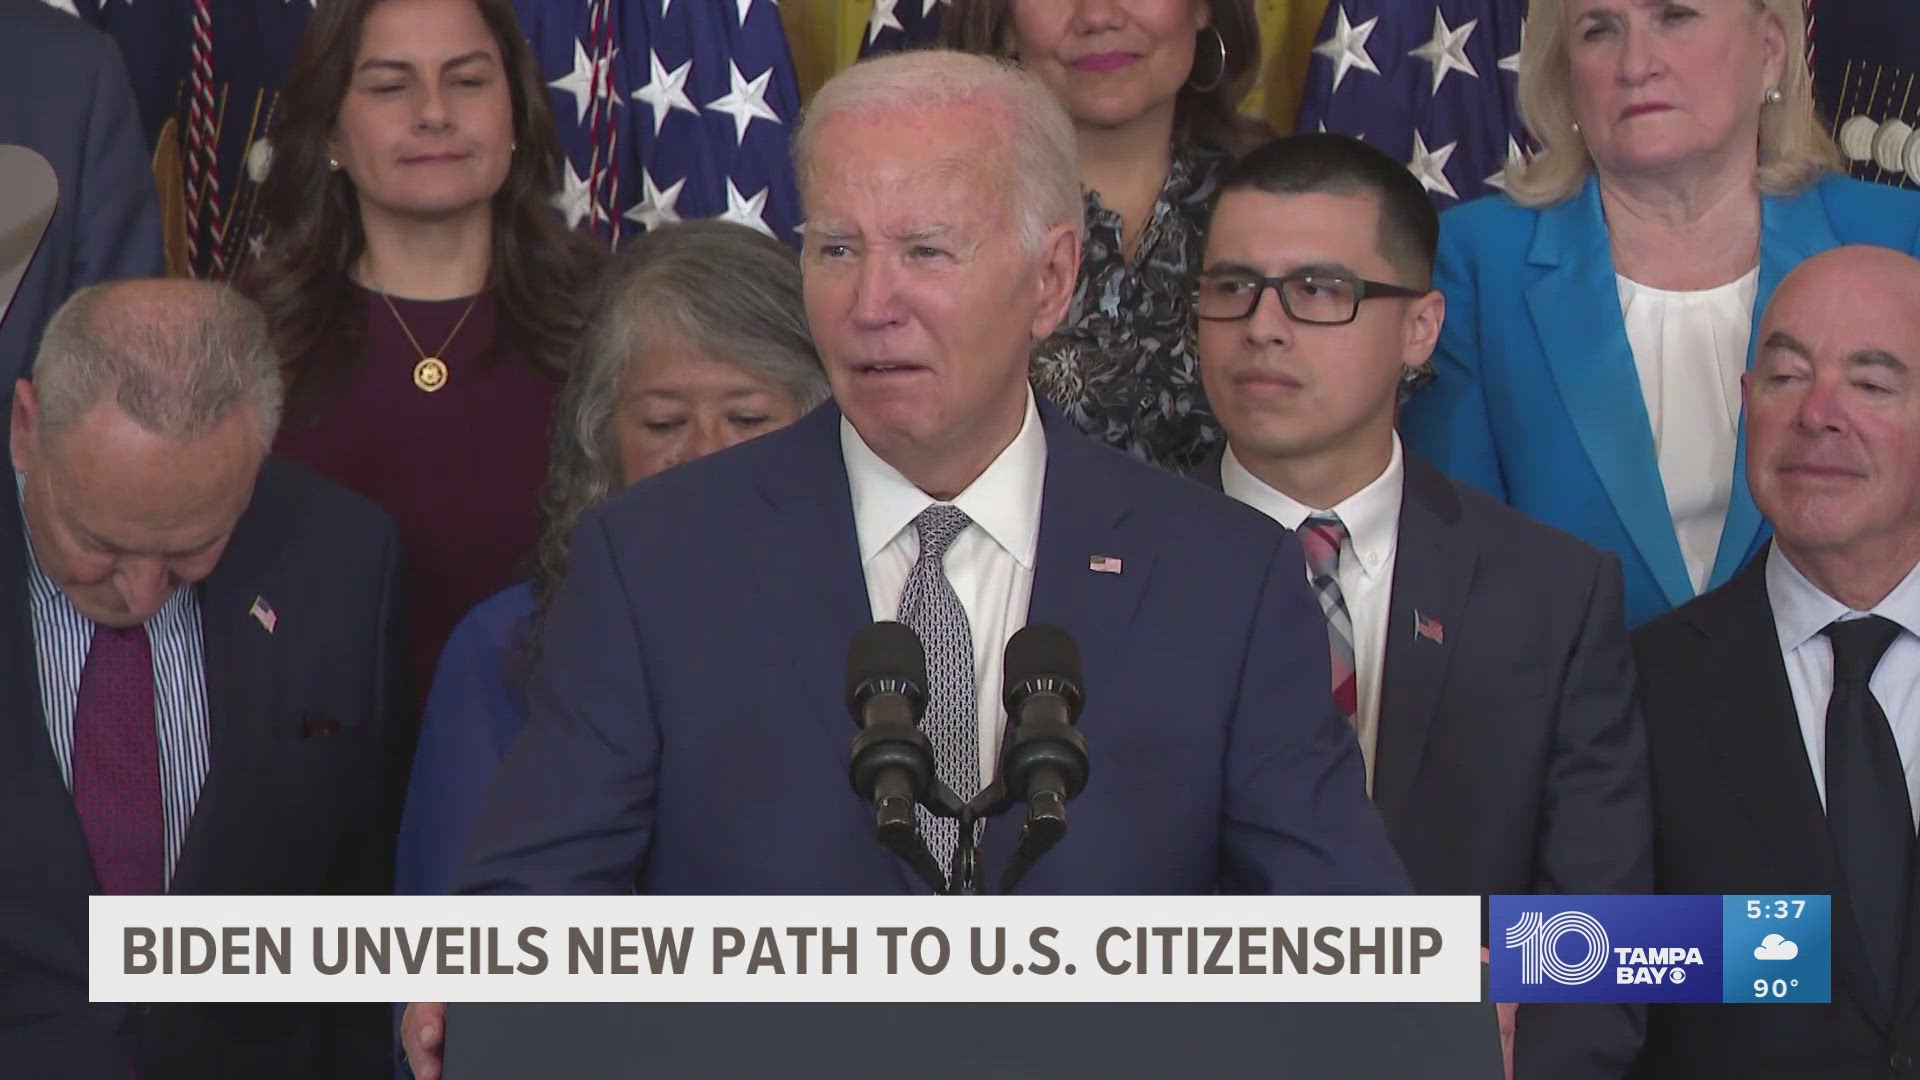 Biden said much of his decision is family-oriented.